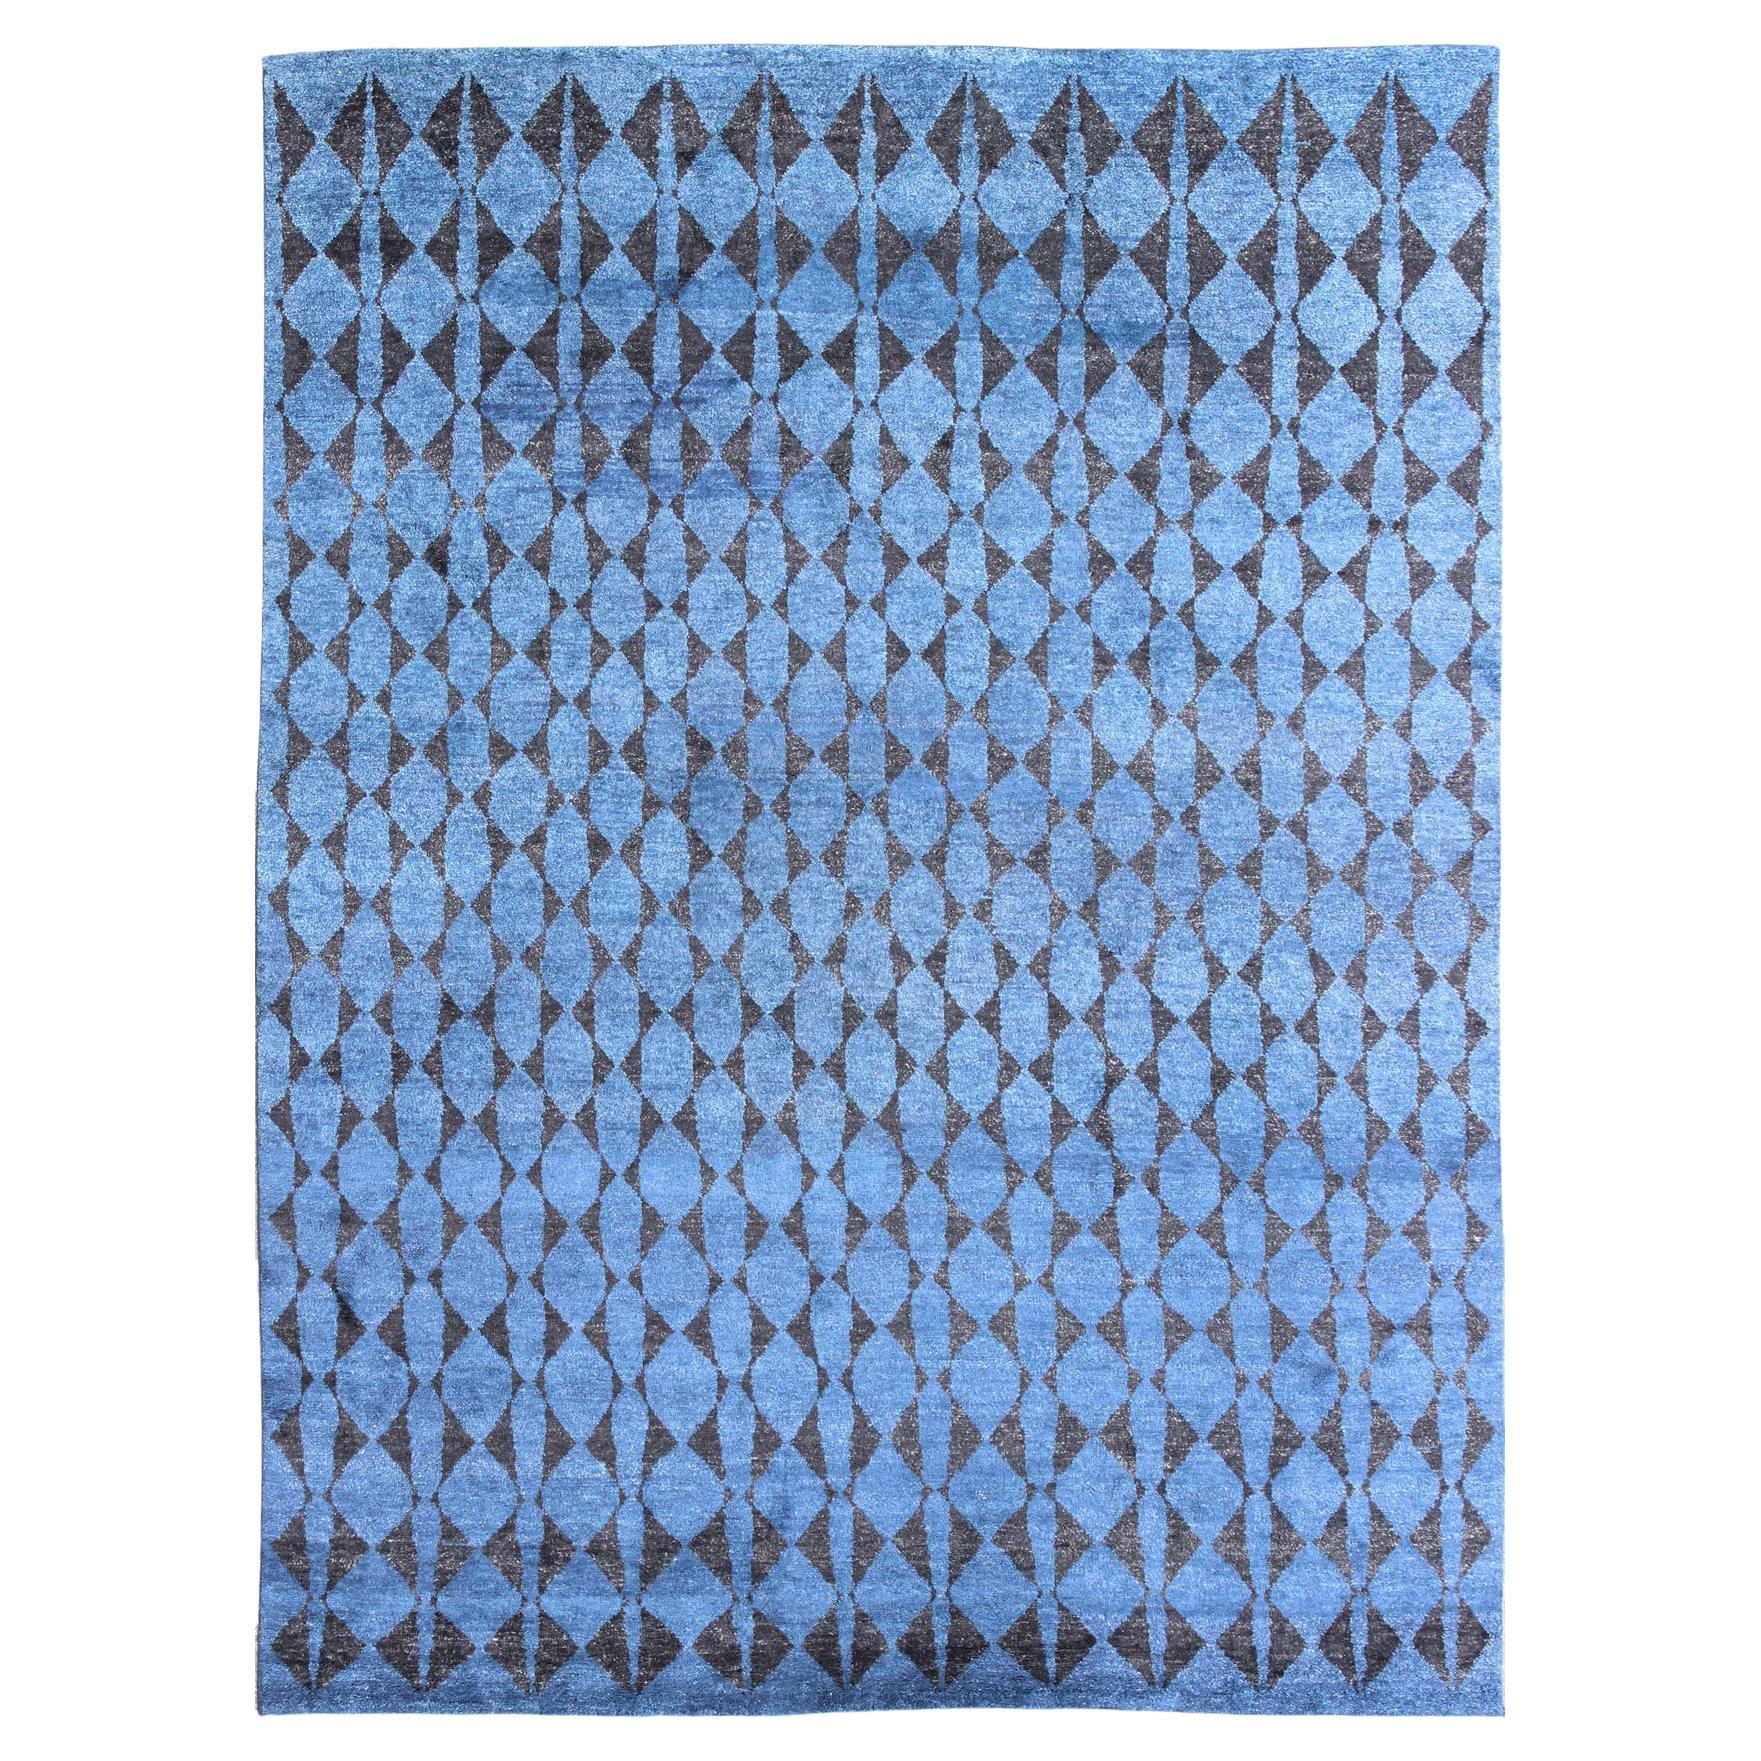 Large Moroccan Rug in All over Design in Beautiful Blue & Black   10'2'' x 13'8'